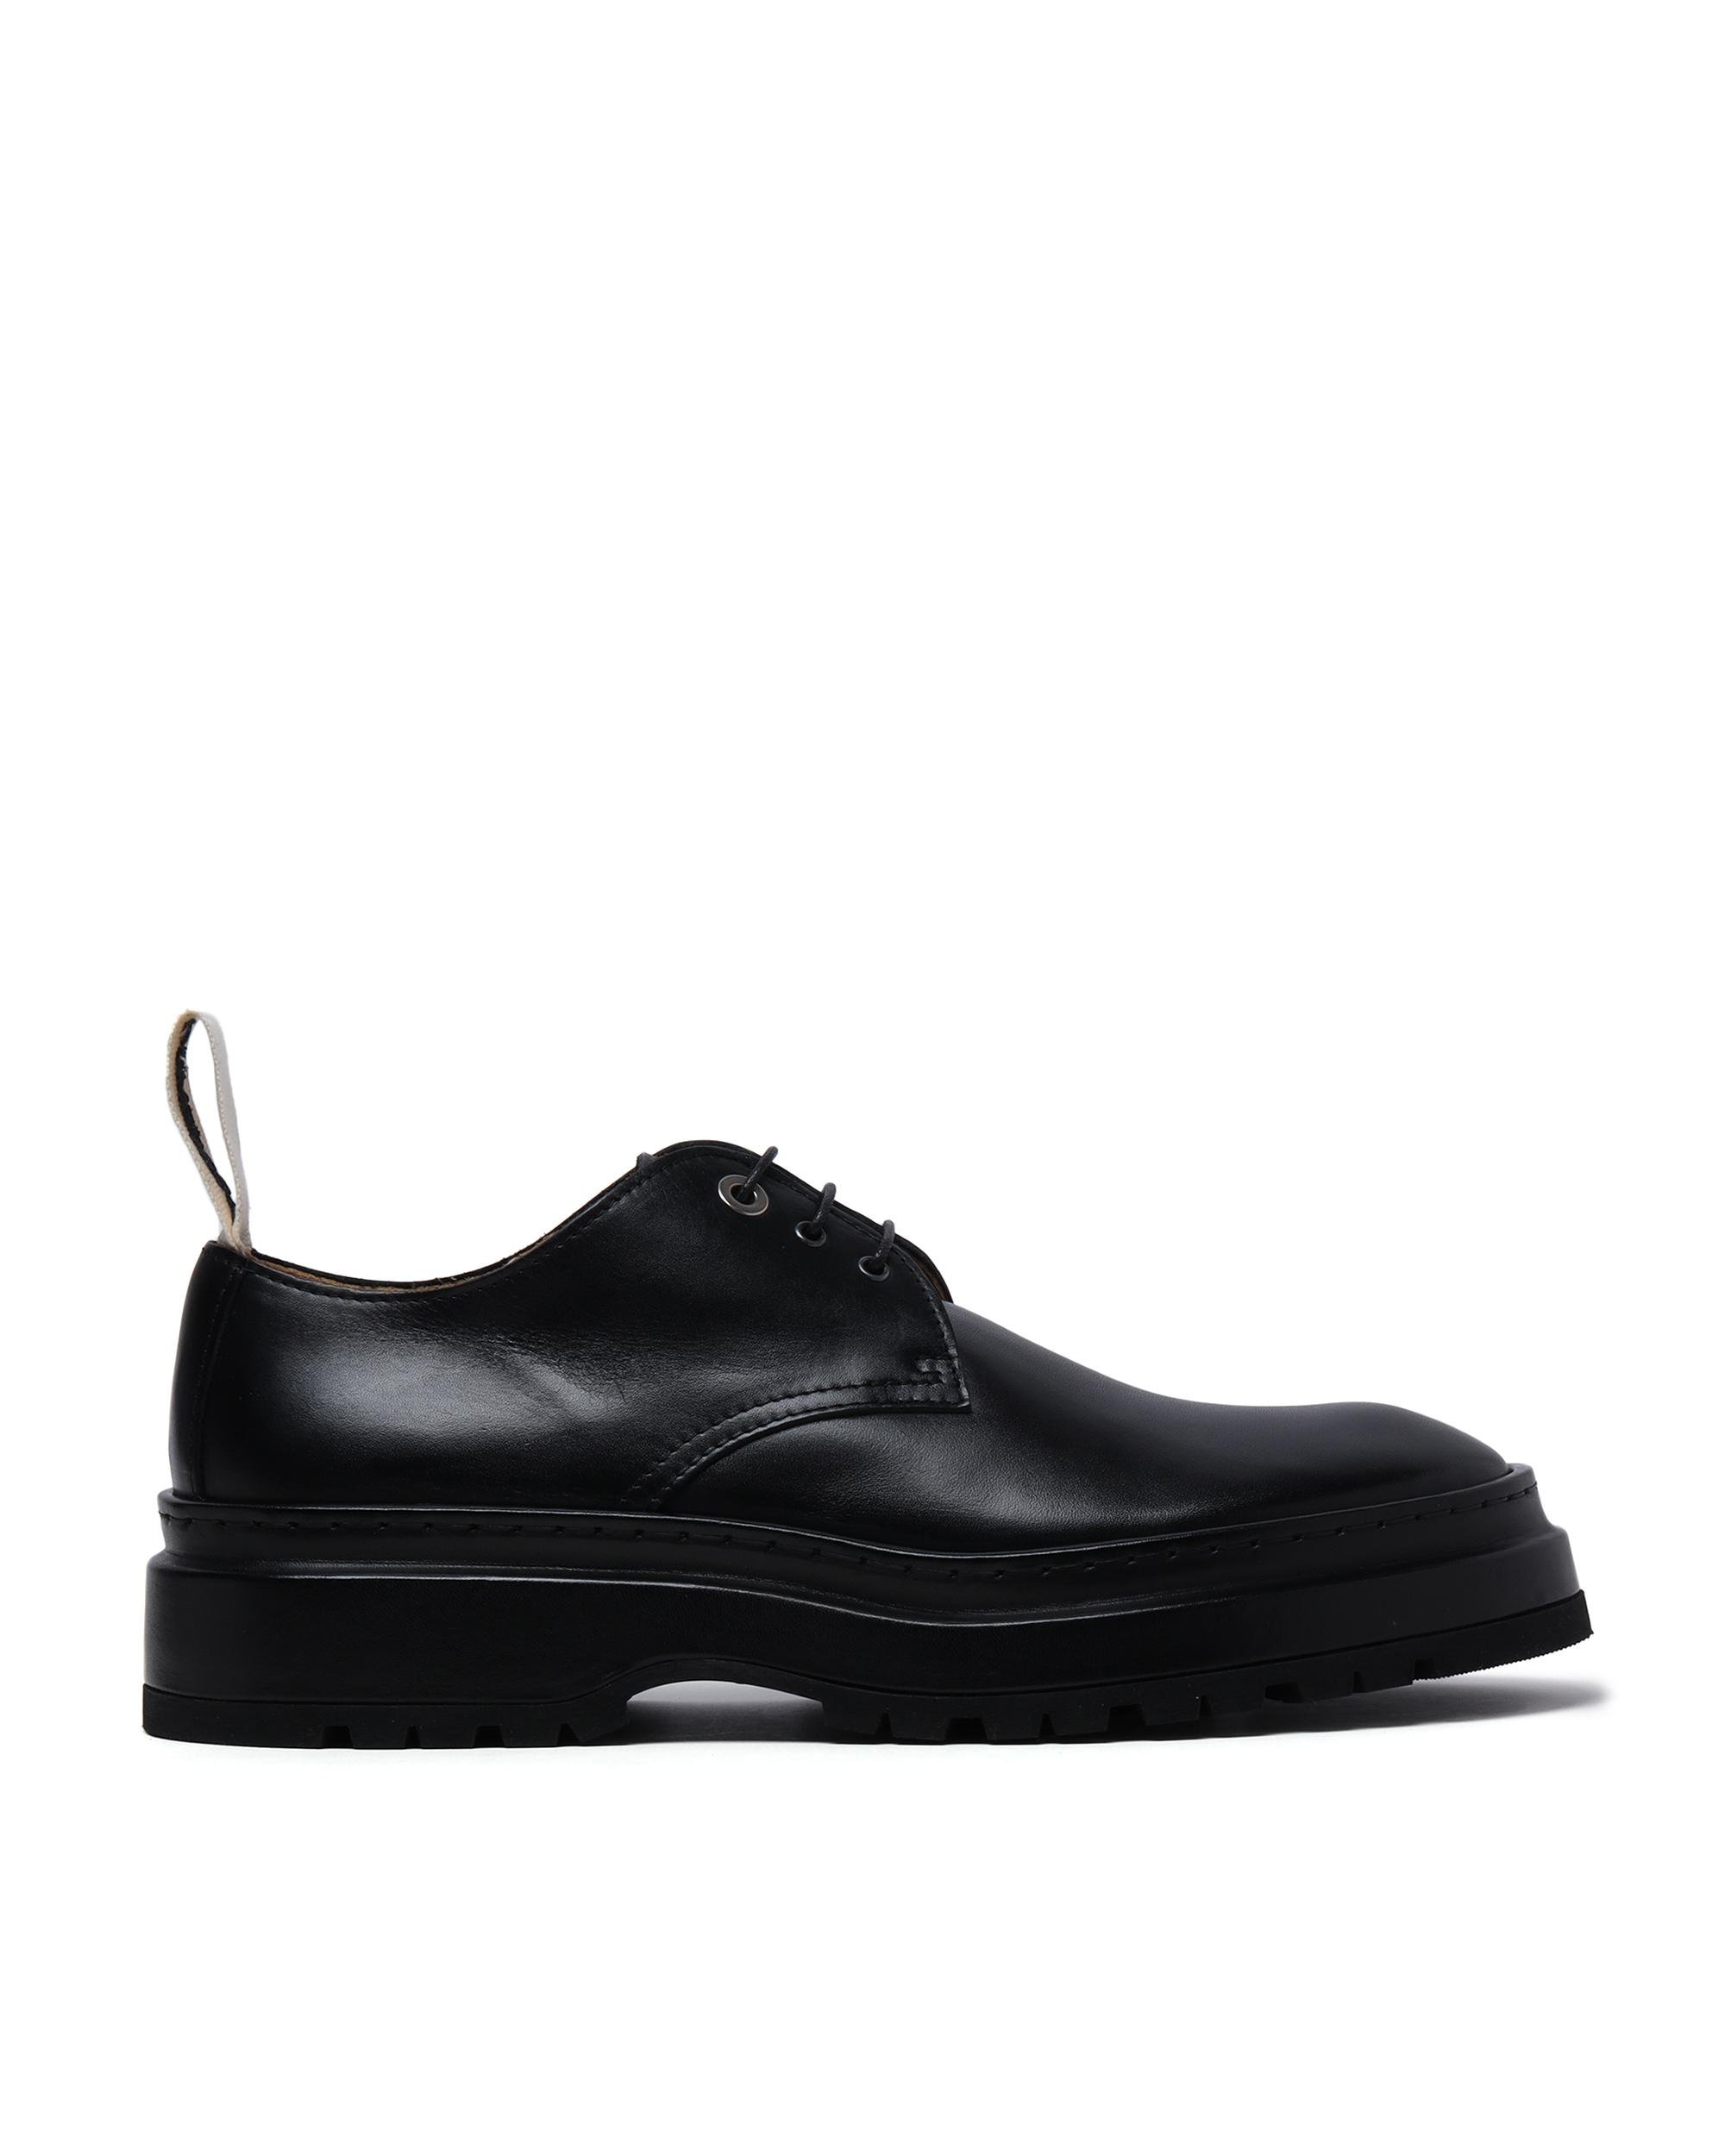 Derby shoes by JACQUEMUS